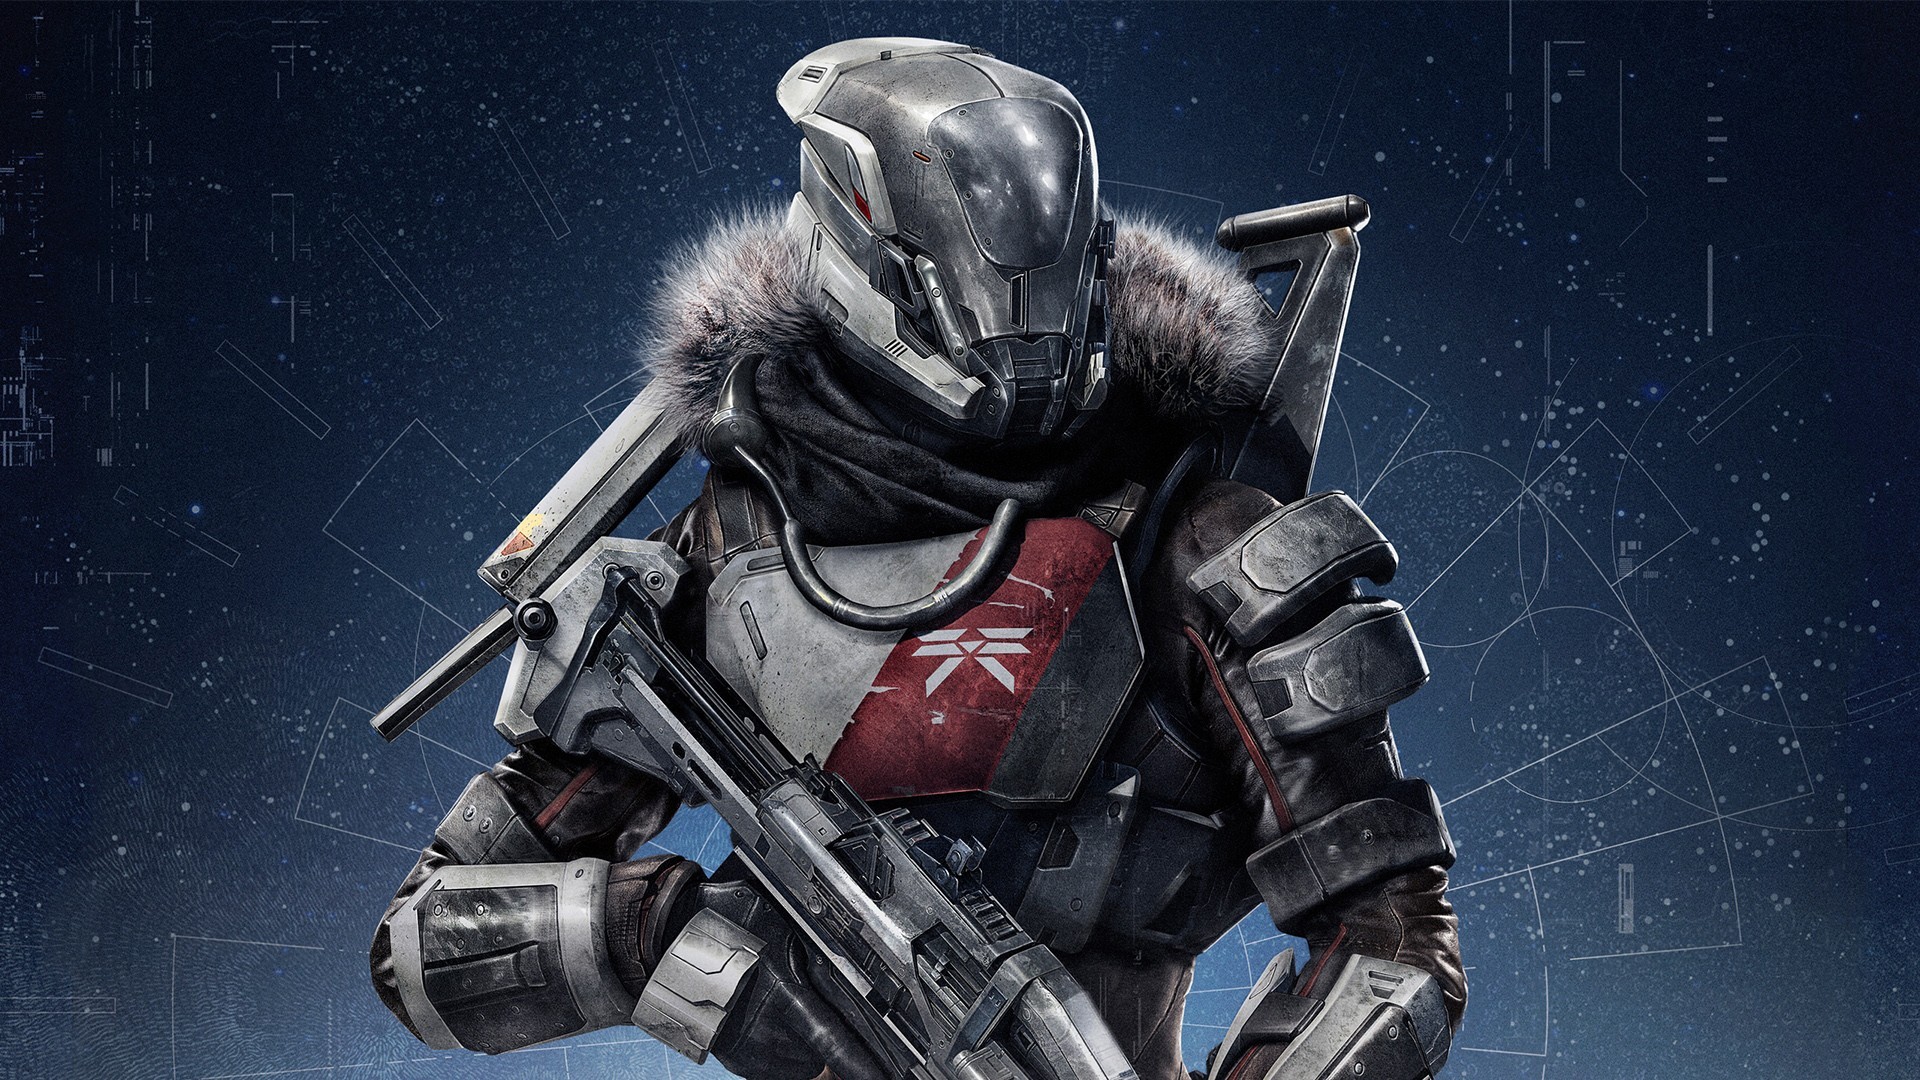 destiny wallpaper,pc game,action adventure game,shooter game,games,fictional character